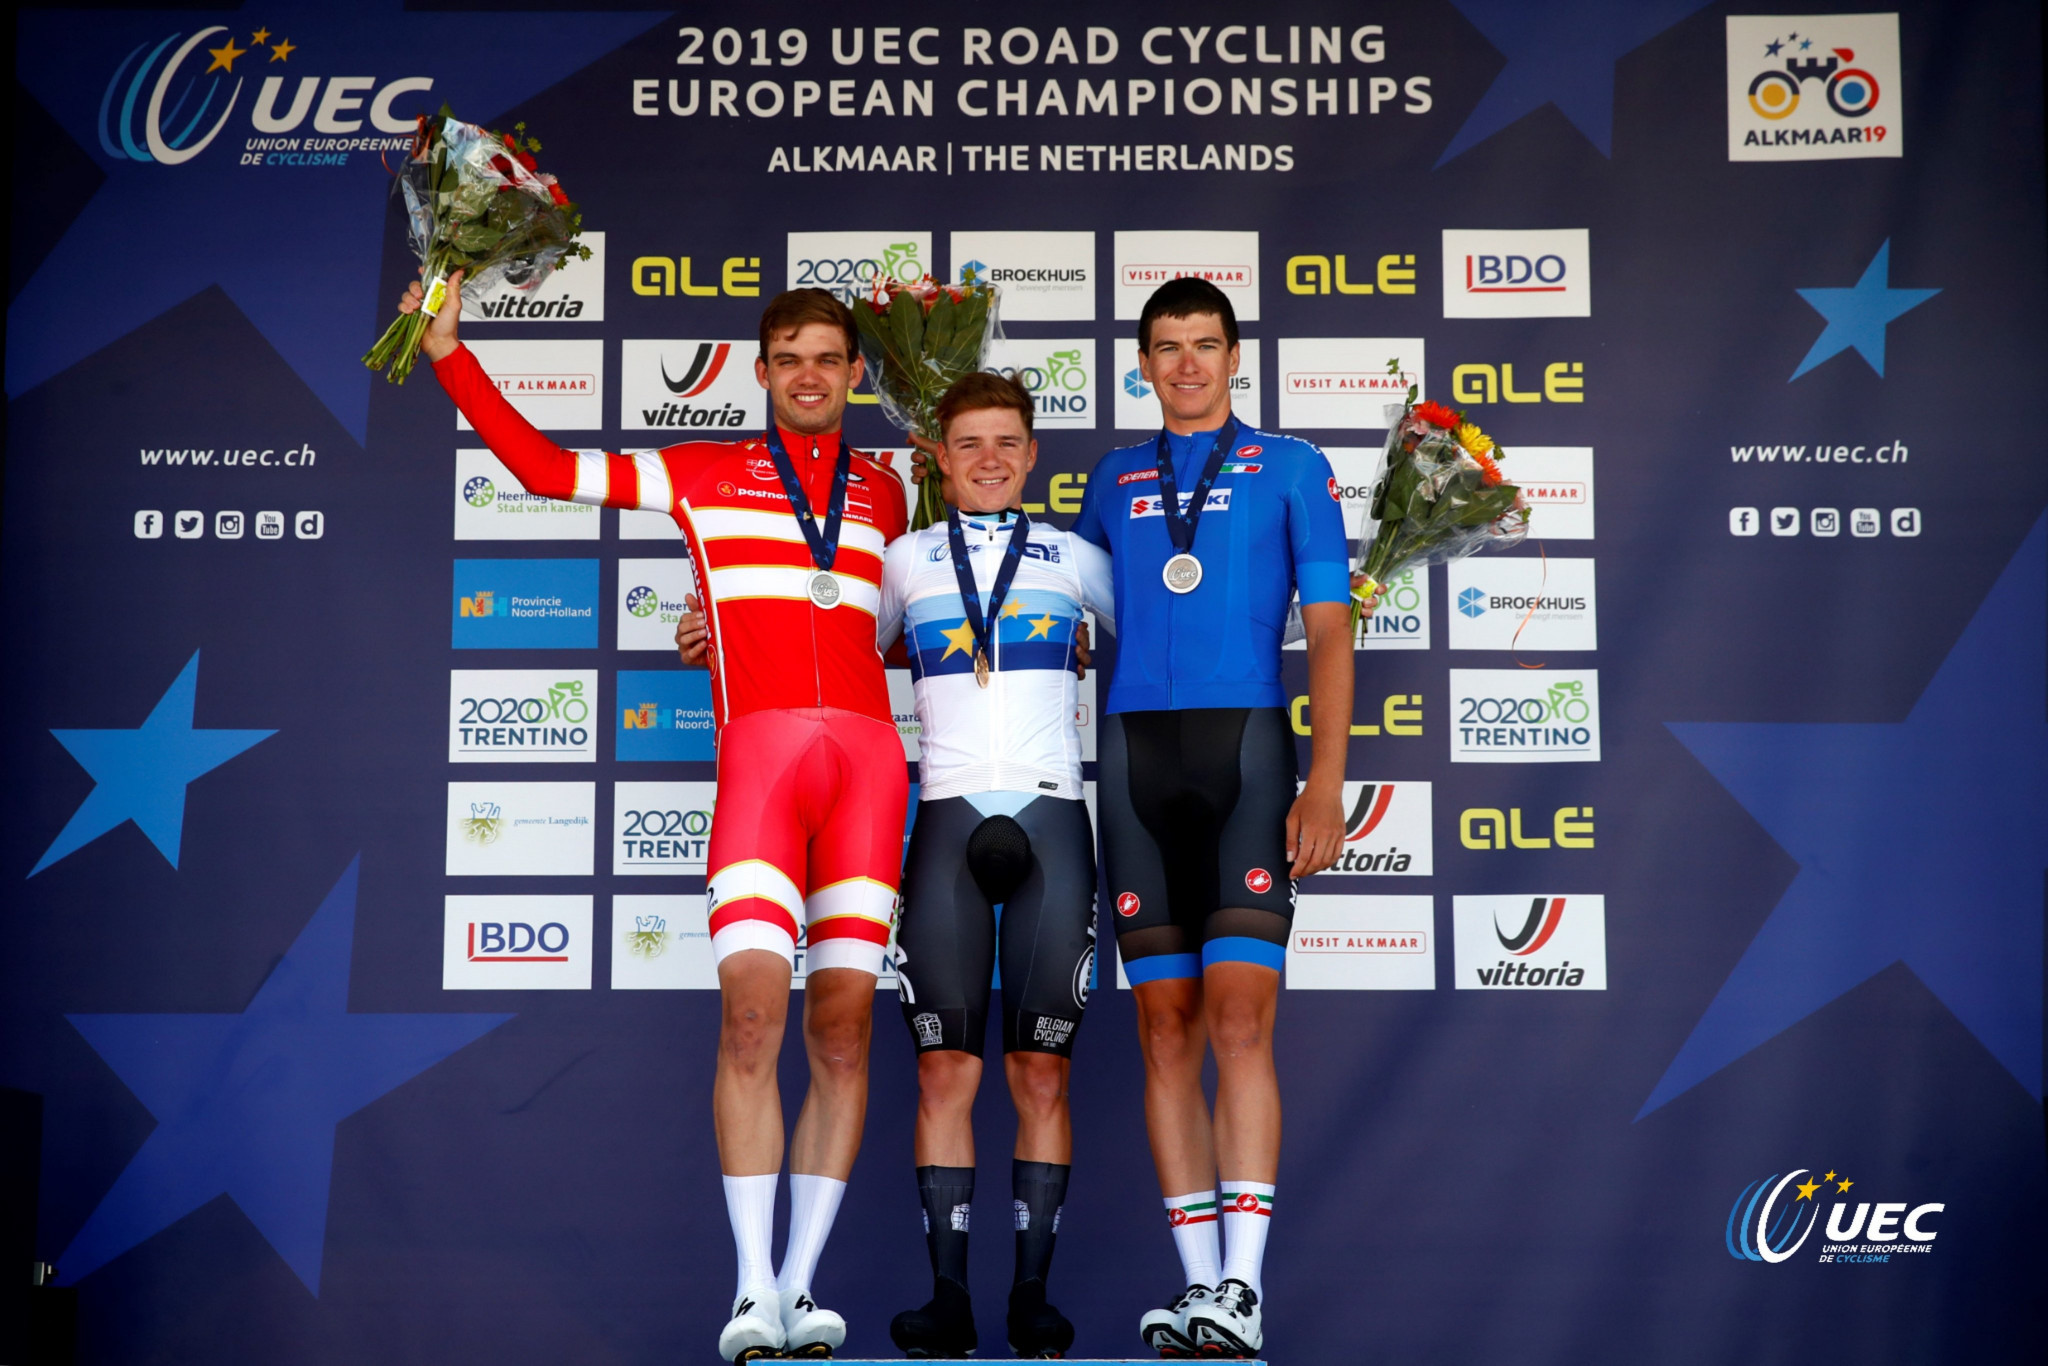 Remco Evenepoel paid tribute to fellow Belgian cyclist Bjorg Lambrecht after claiming elite men's time trial victory at the European Cycling Union Road Championships ©Twitter/UEC Cycling